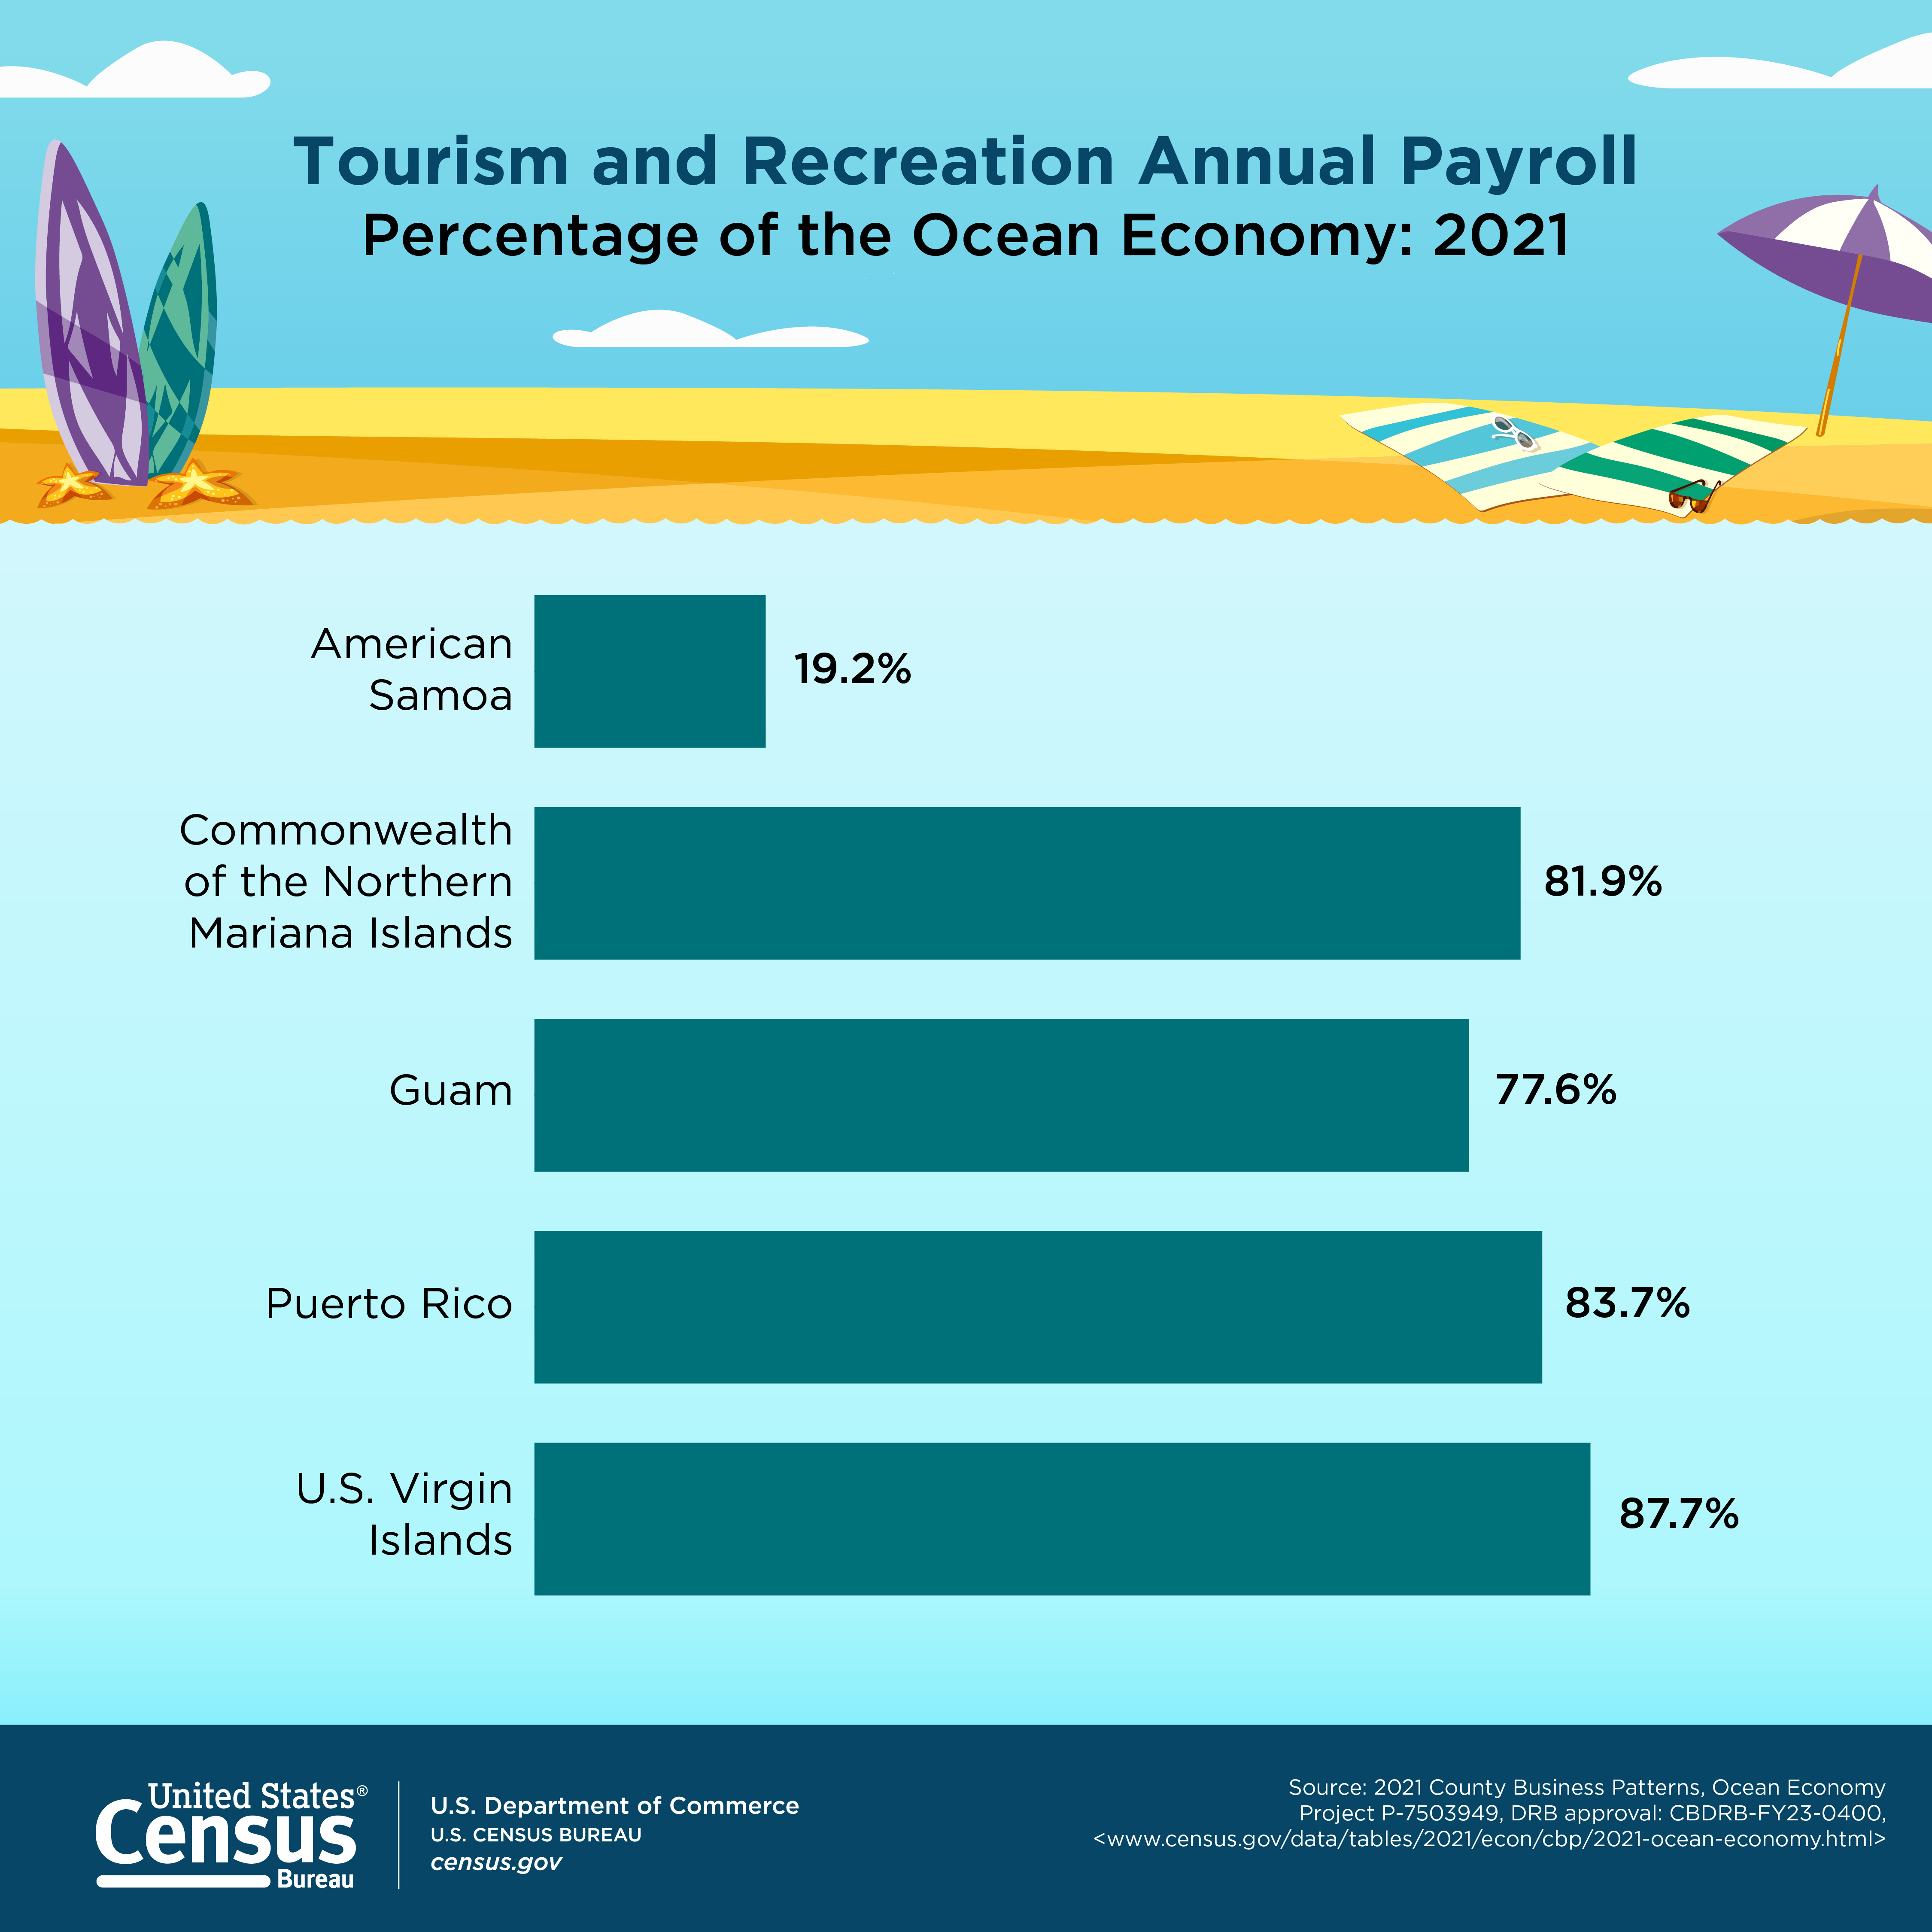 Tourism and Recreation Annual Payroll Percentage of the Ocean Economy